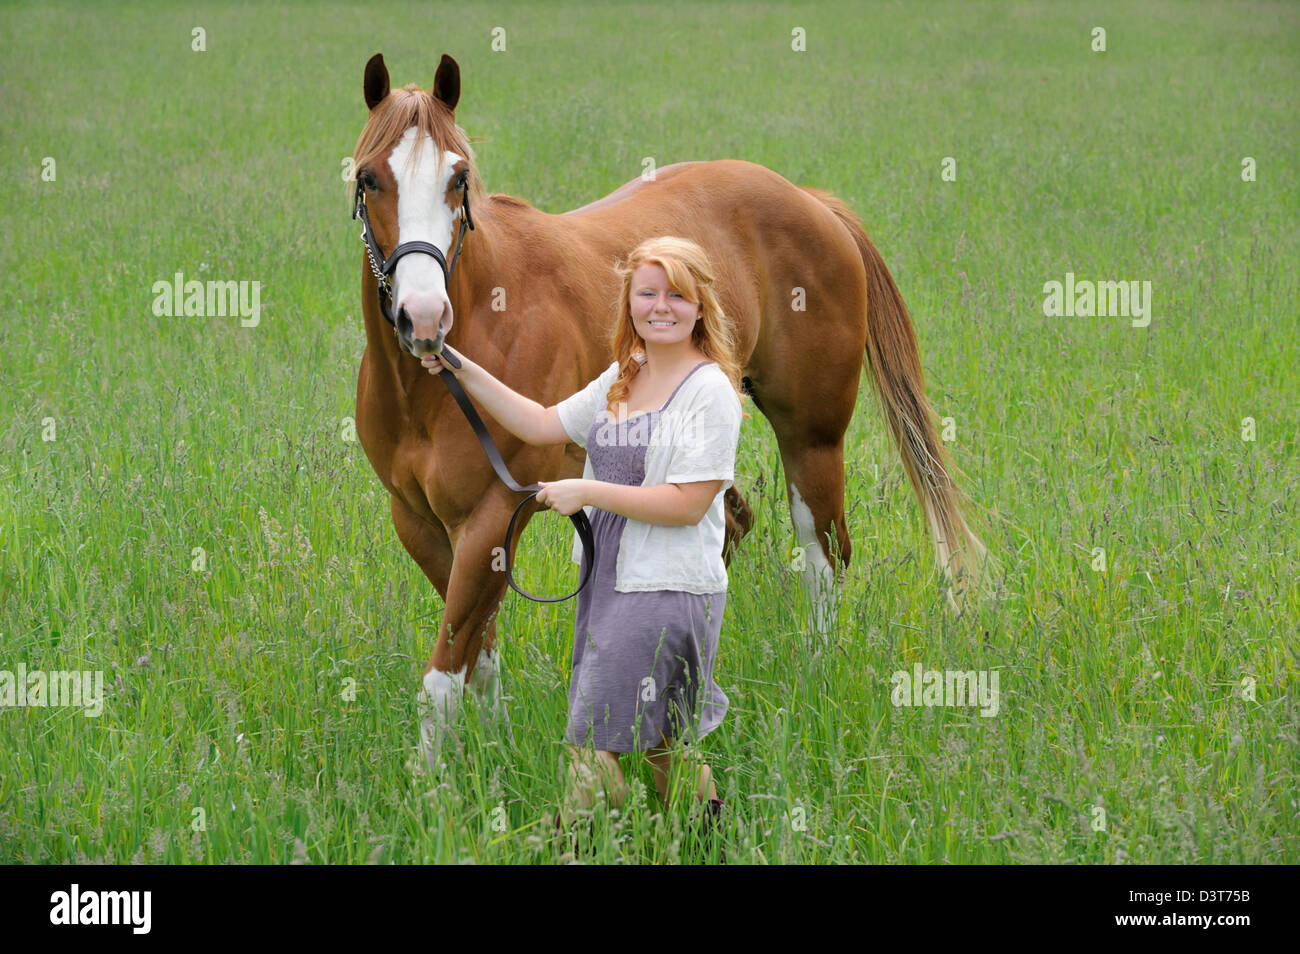 Young woman leading horse through grassy field, an eighteen year old red haired horsewoman. Stock Photo